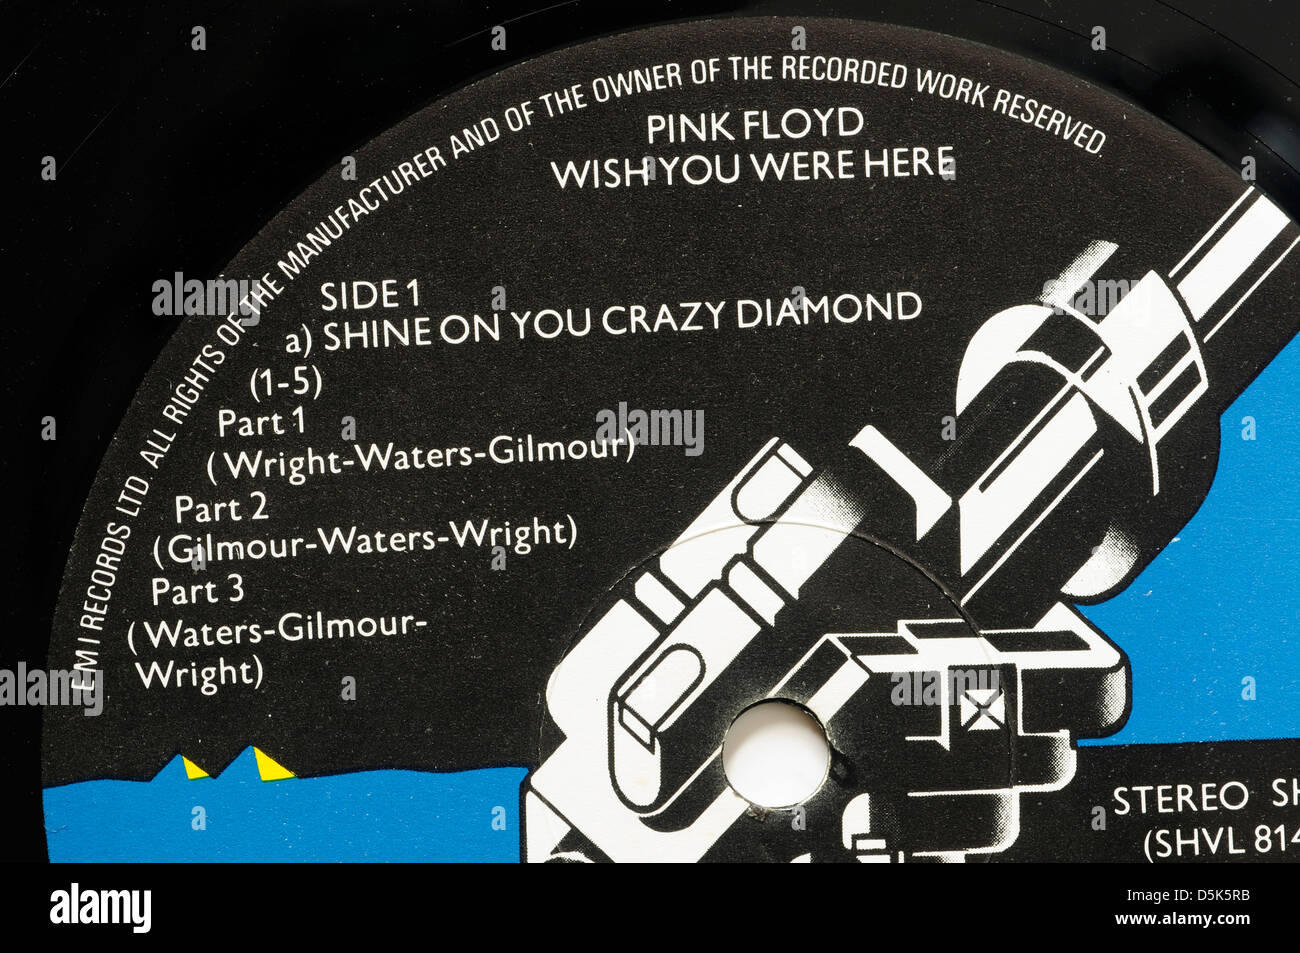 wood only map Pink Floyd Wish You Were Here record label with classic track Shine On You  Crazy Diamond Stock Photo - Alamy